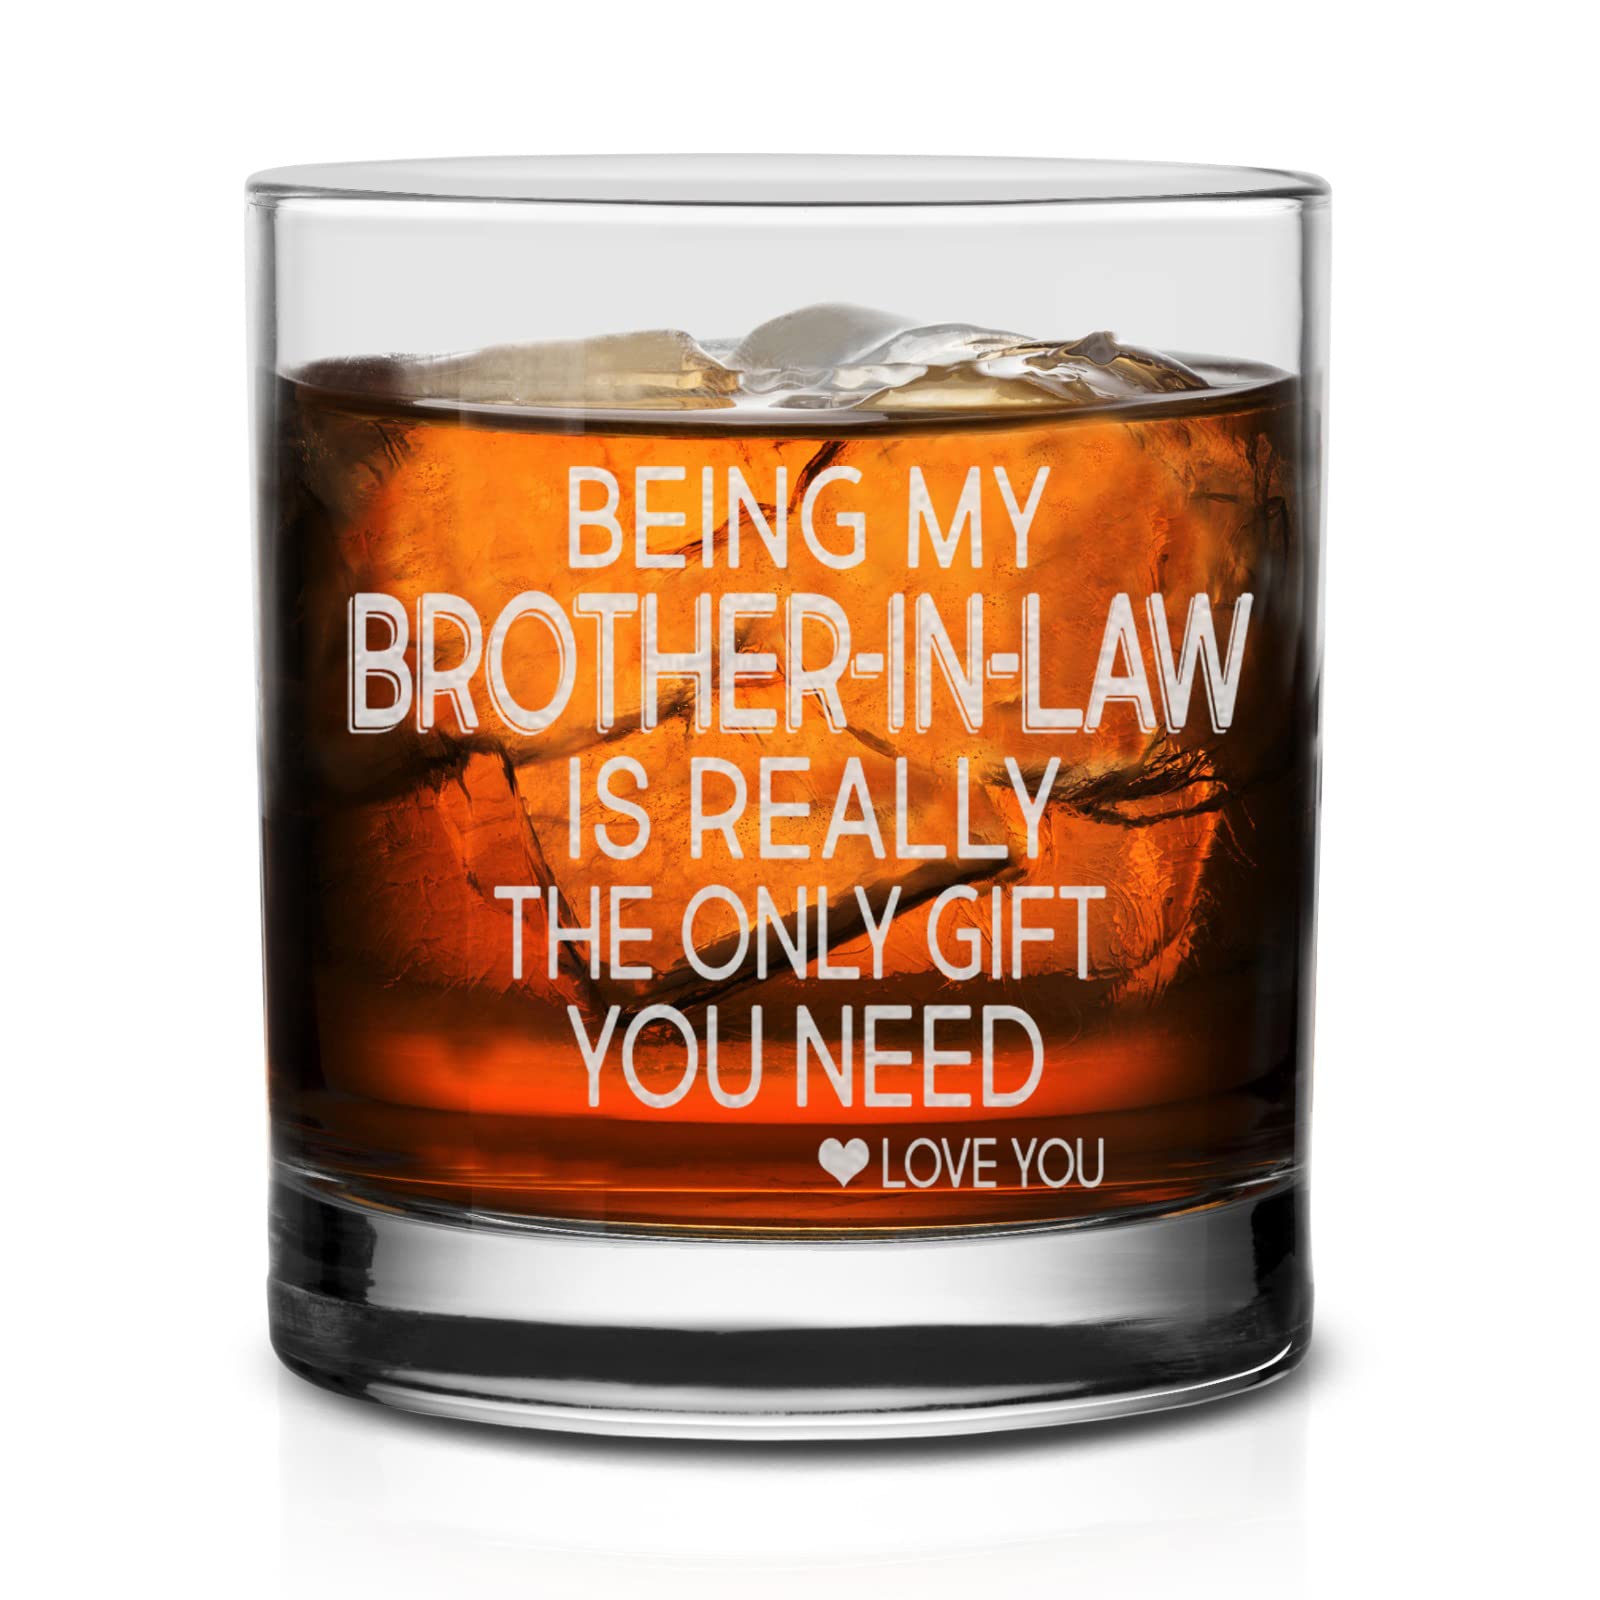 Being My Brother-In-Law is Really the Only Gift You Need -Whiskey Glass- Sarcastic and Great Gift For Brother in Law, Friends, Brothers